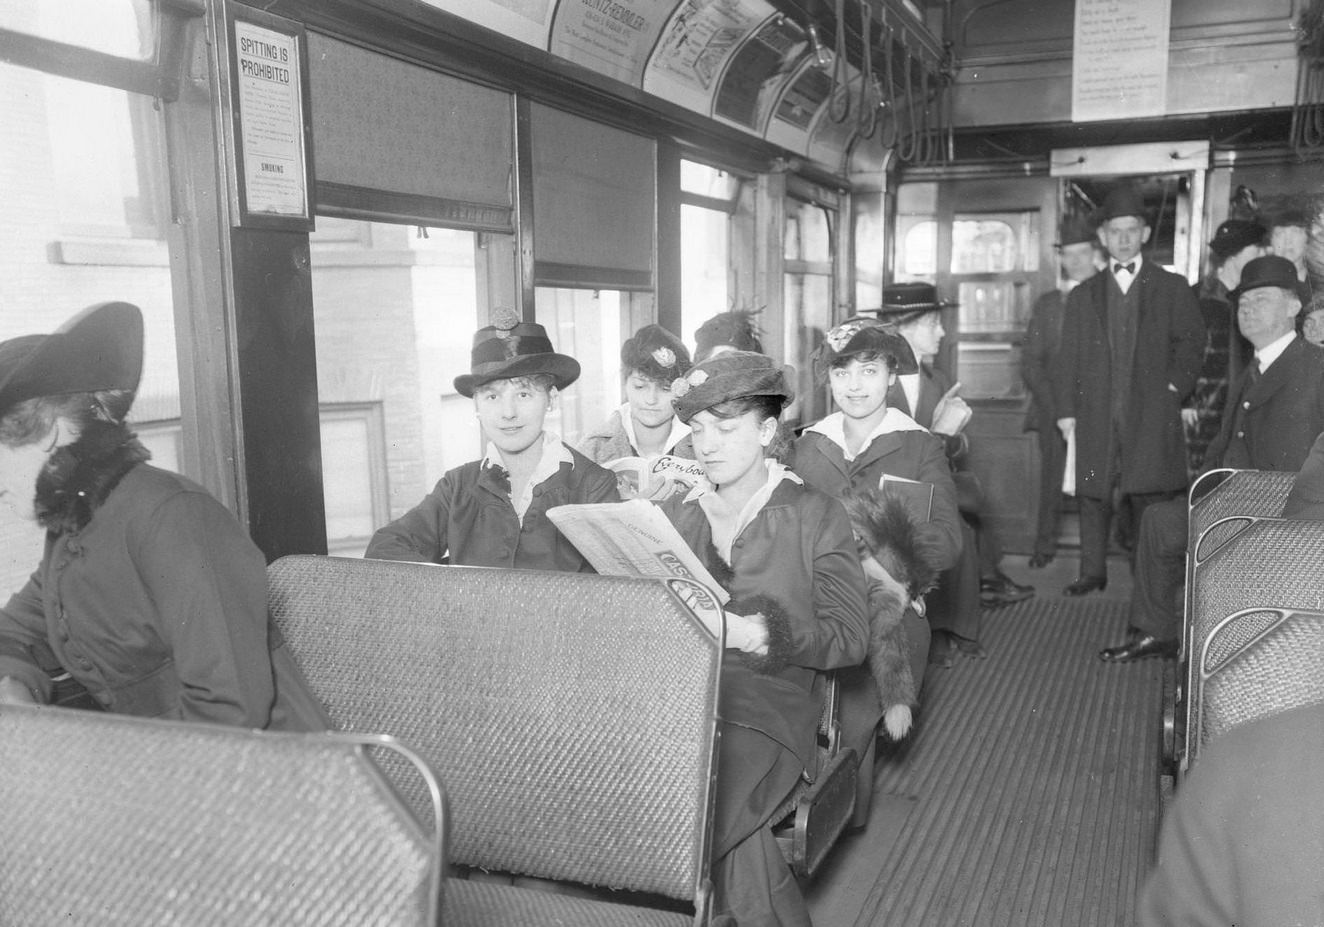 Passengers sitting on an open window elevated train car on the Jackson Park branch in Chicago, Illinois, 1910s.